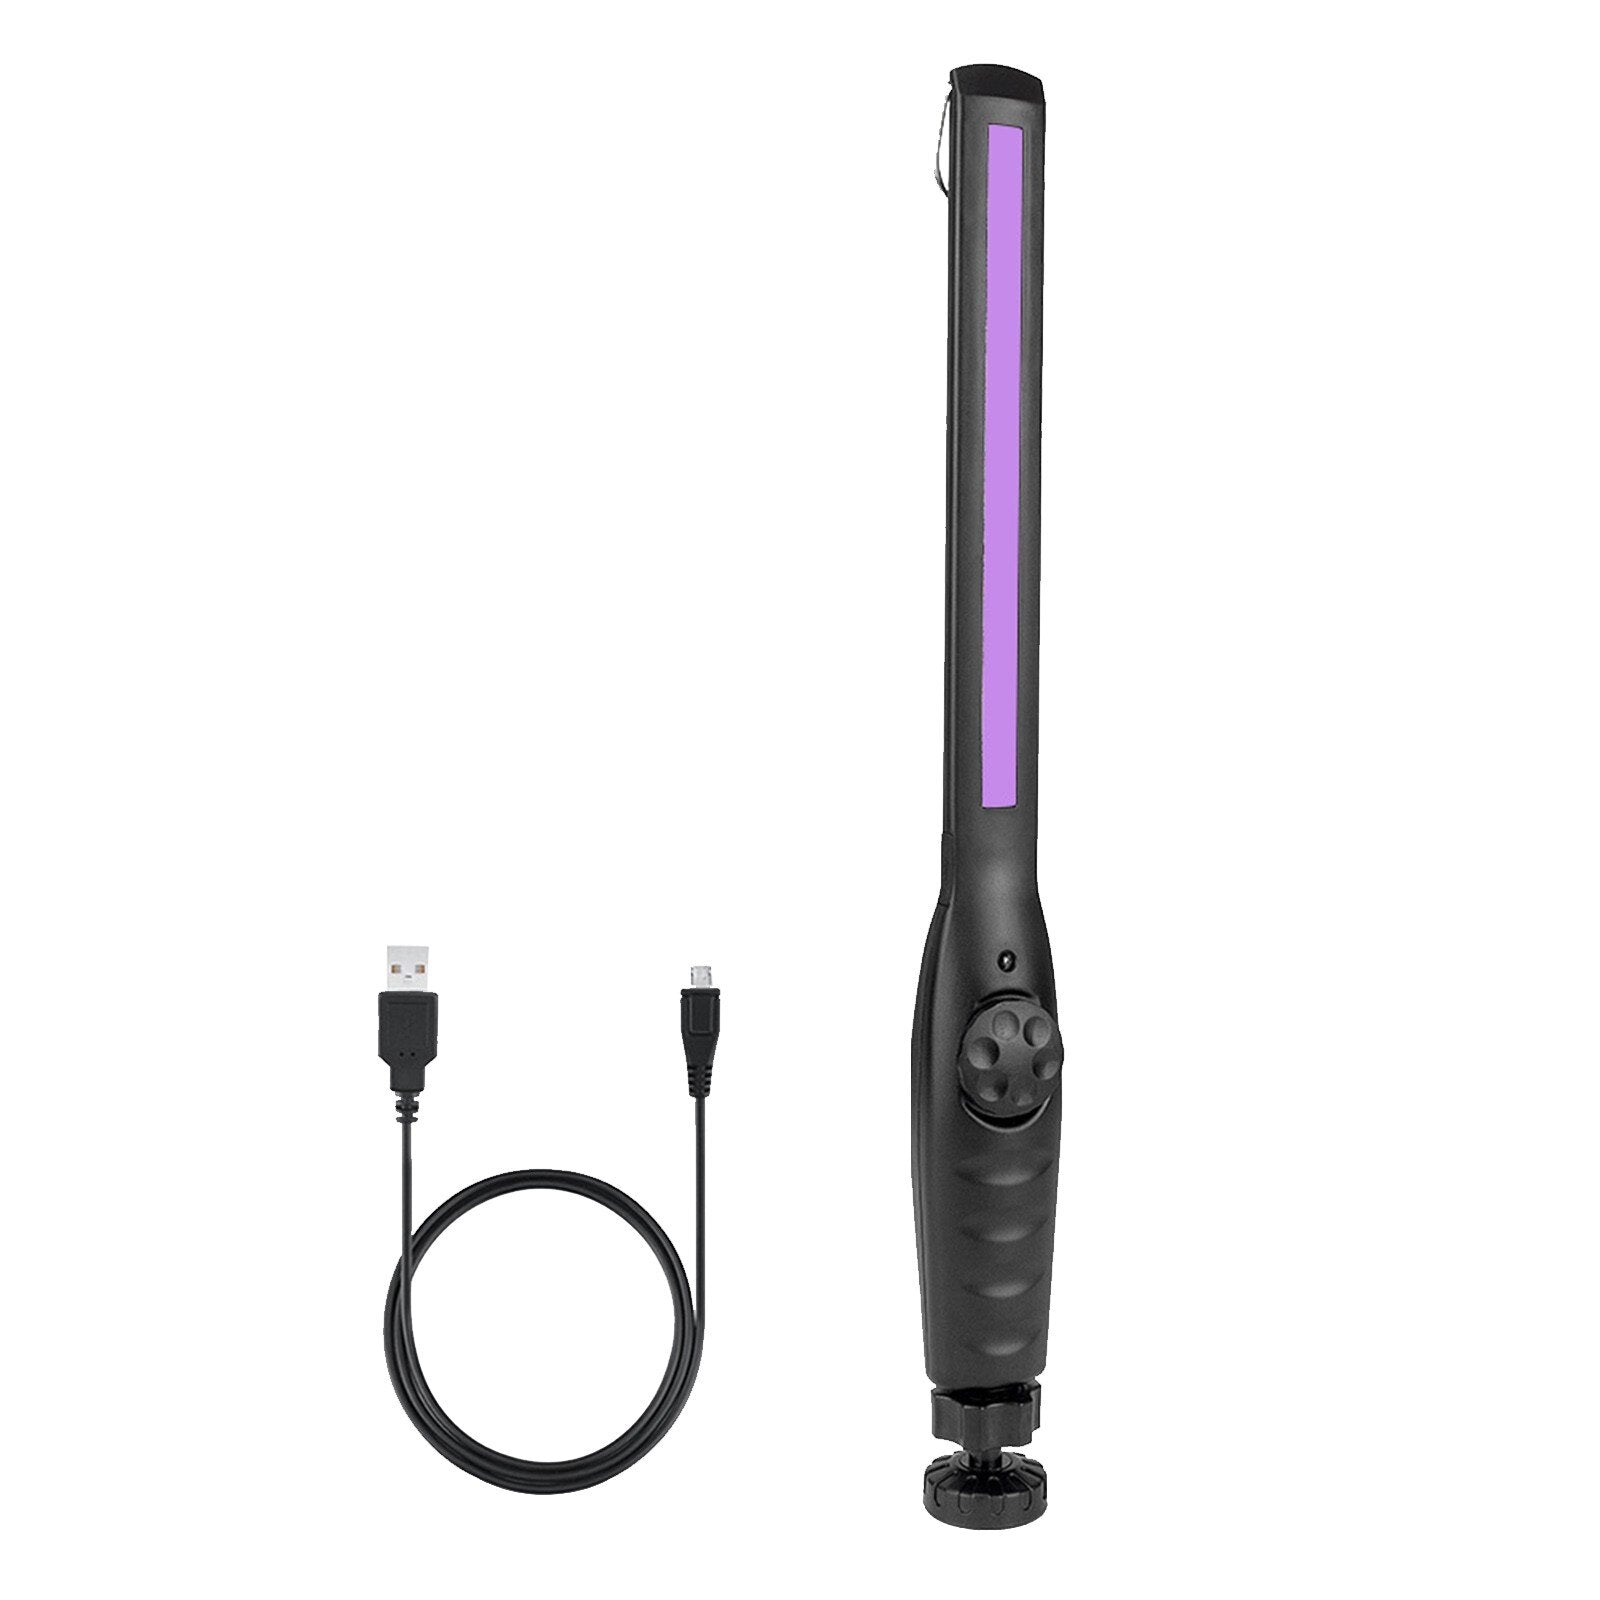 40LED Ultraviolet Light Disinfecting Handheld Portable Sterilization Wand +USB Cable | Decor Gifts and More